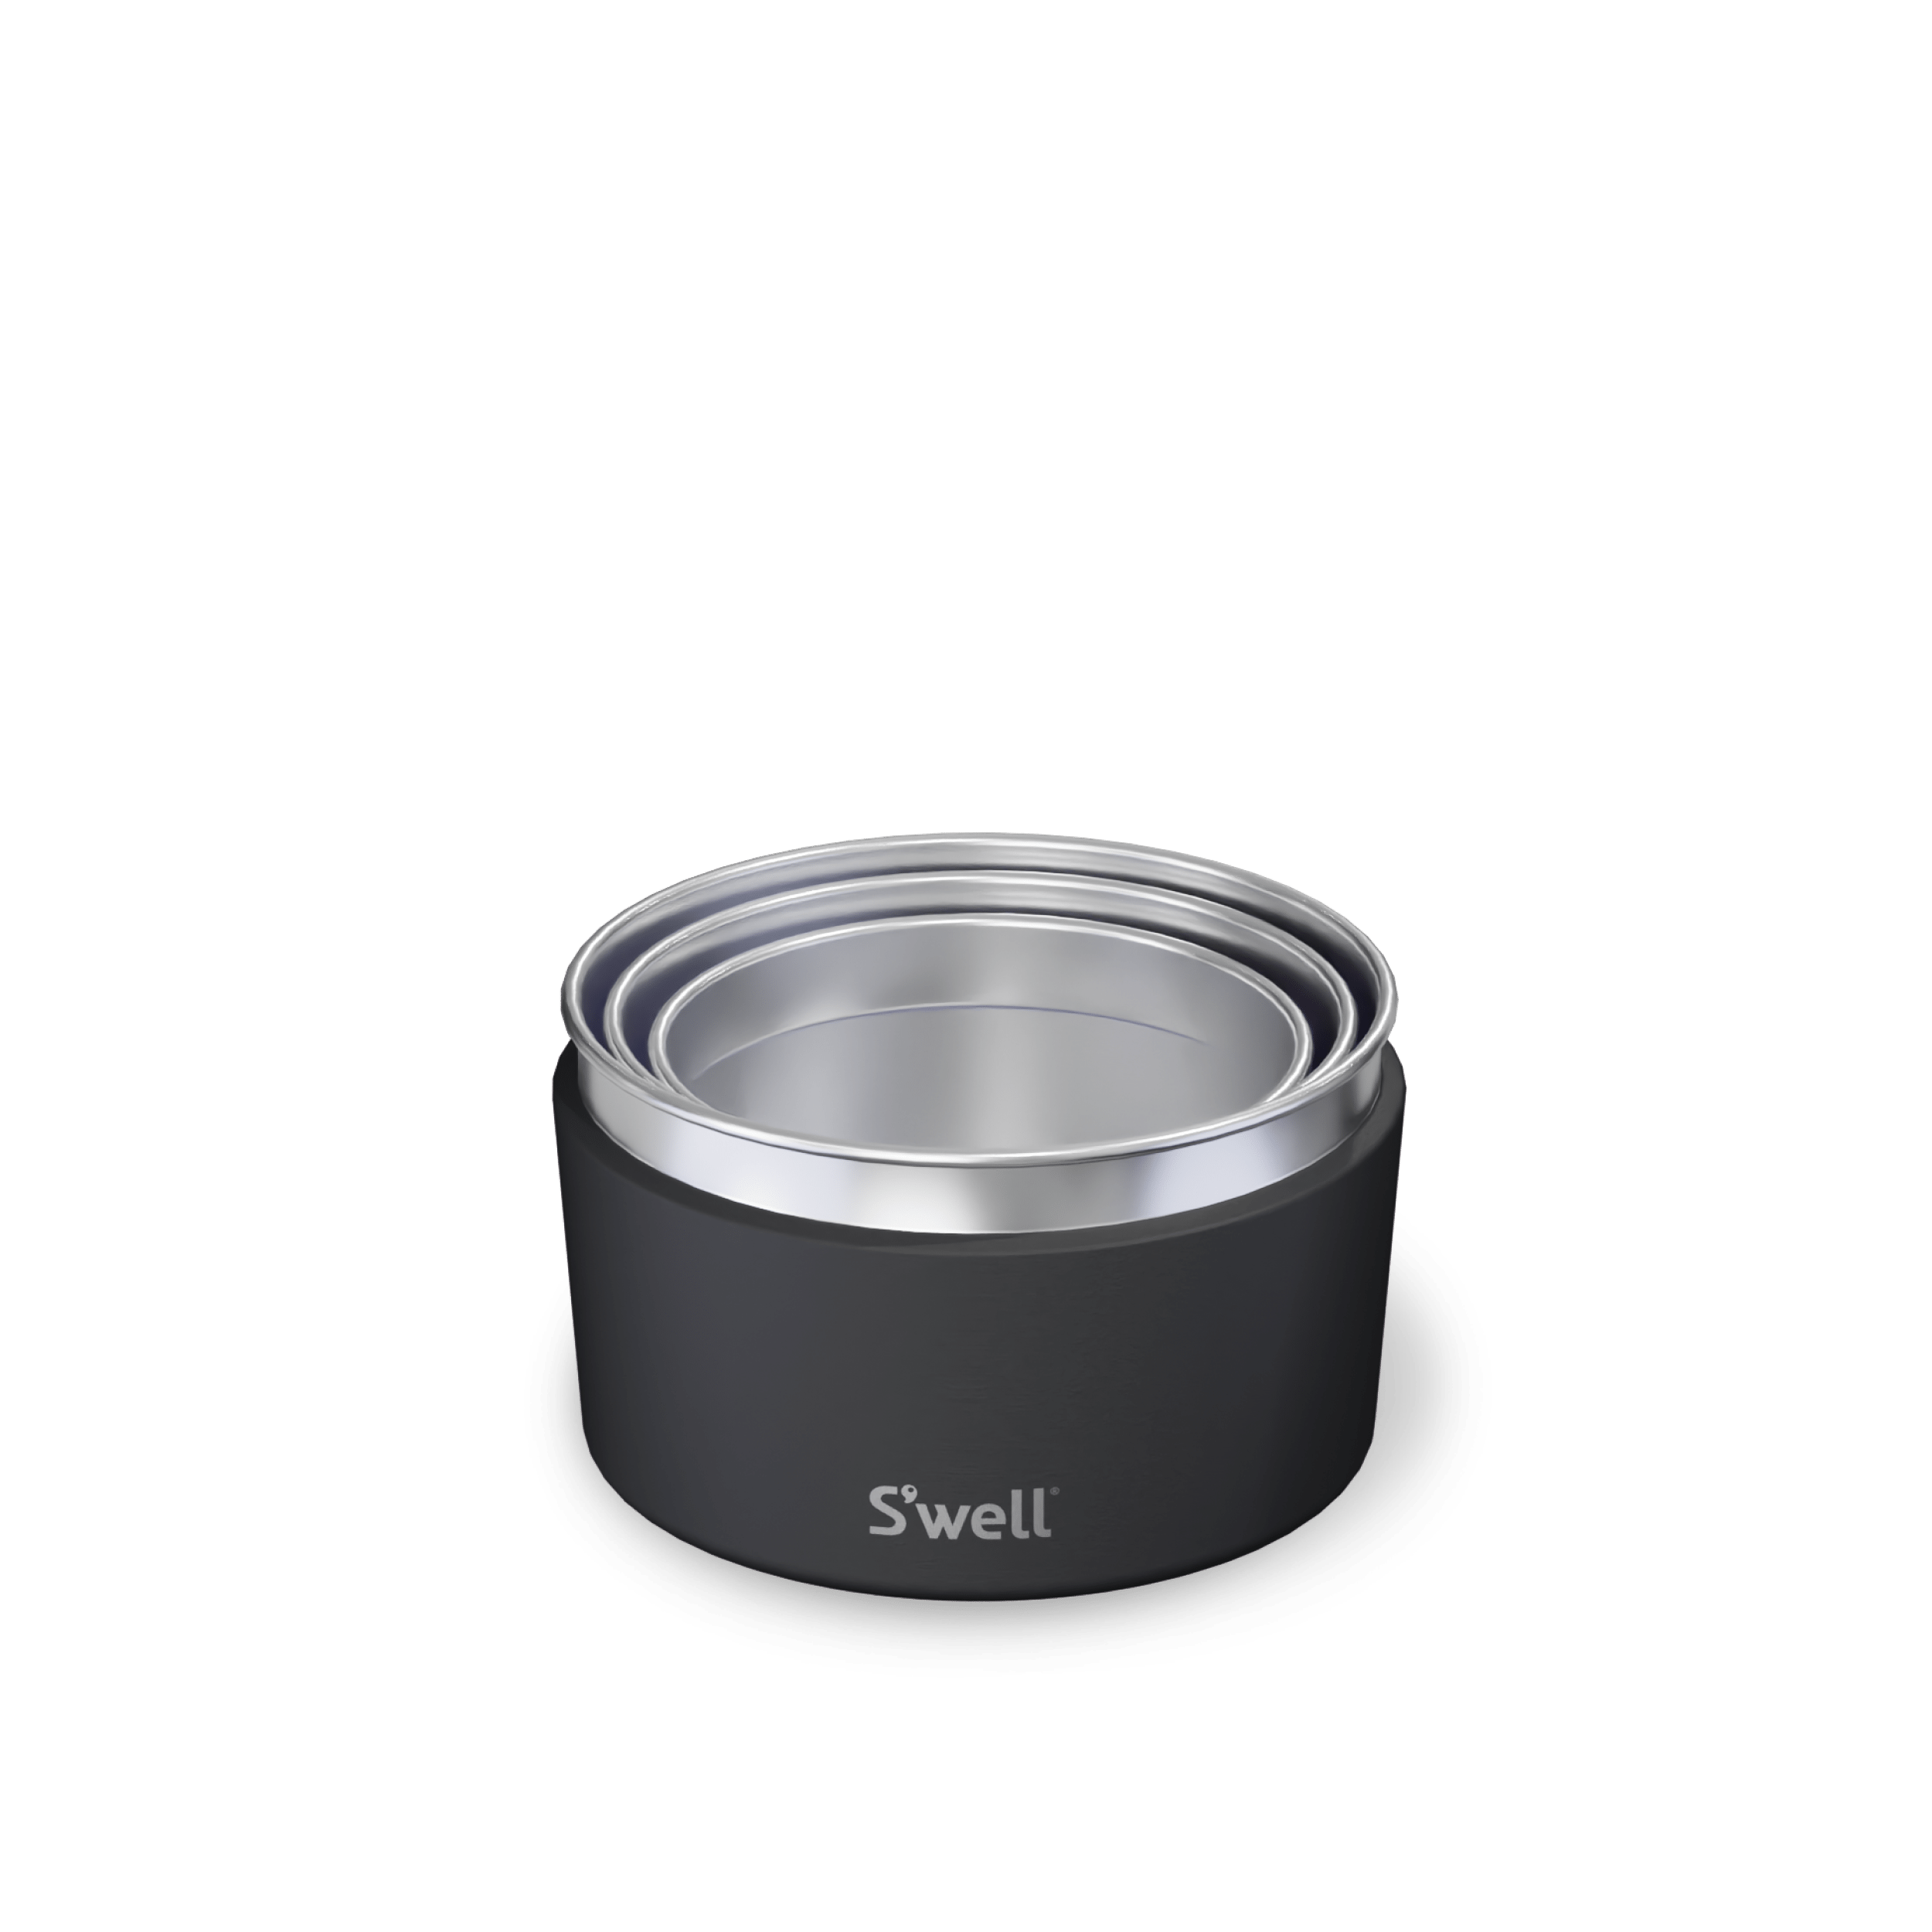 S'well swell 16oz Food Canister $14.00